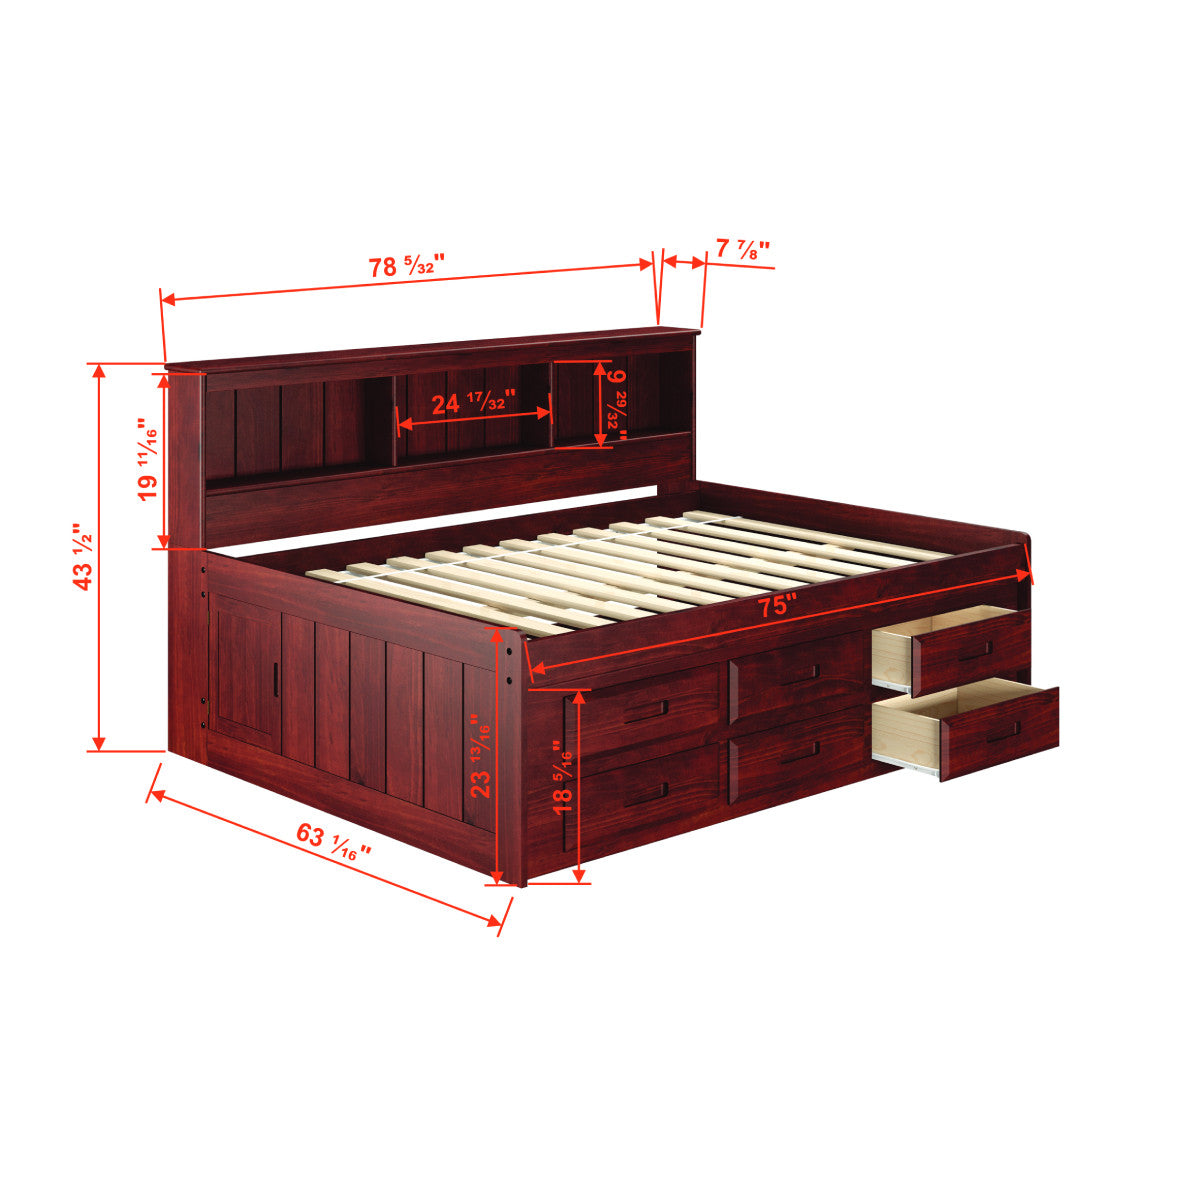 FULL DAYBED BOOKCASE CAPTAINS BED WITH 6 DRAWER UNDER BED STORAGE IN MERLOT FINISH